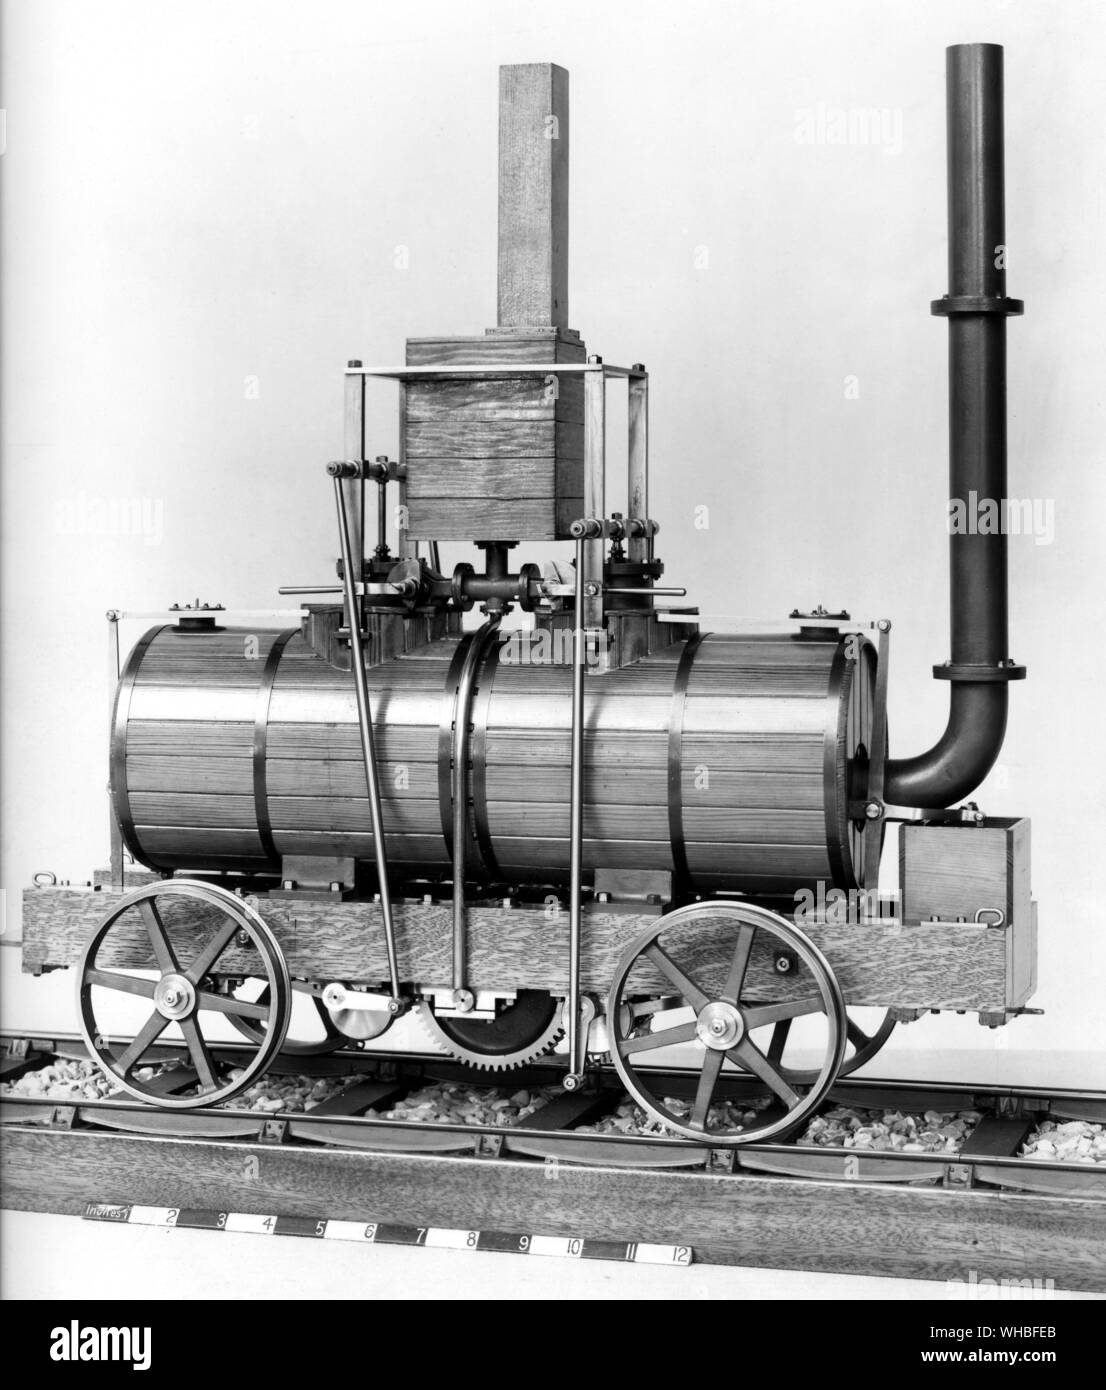 Model of Blenkinsons locomotive 1812 (right side) - John Blenkinsop (1783-1831) was an English mining engineer and an inventor in the area of steam locomotives, who designed the first practical railway locomotive.. Stock Photo